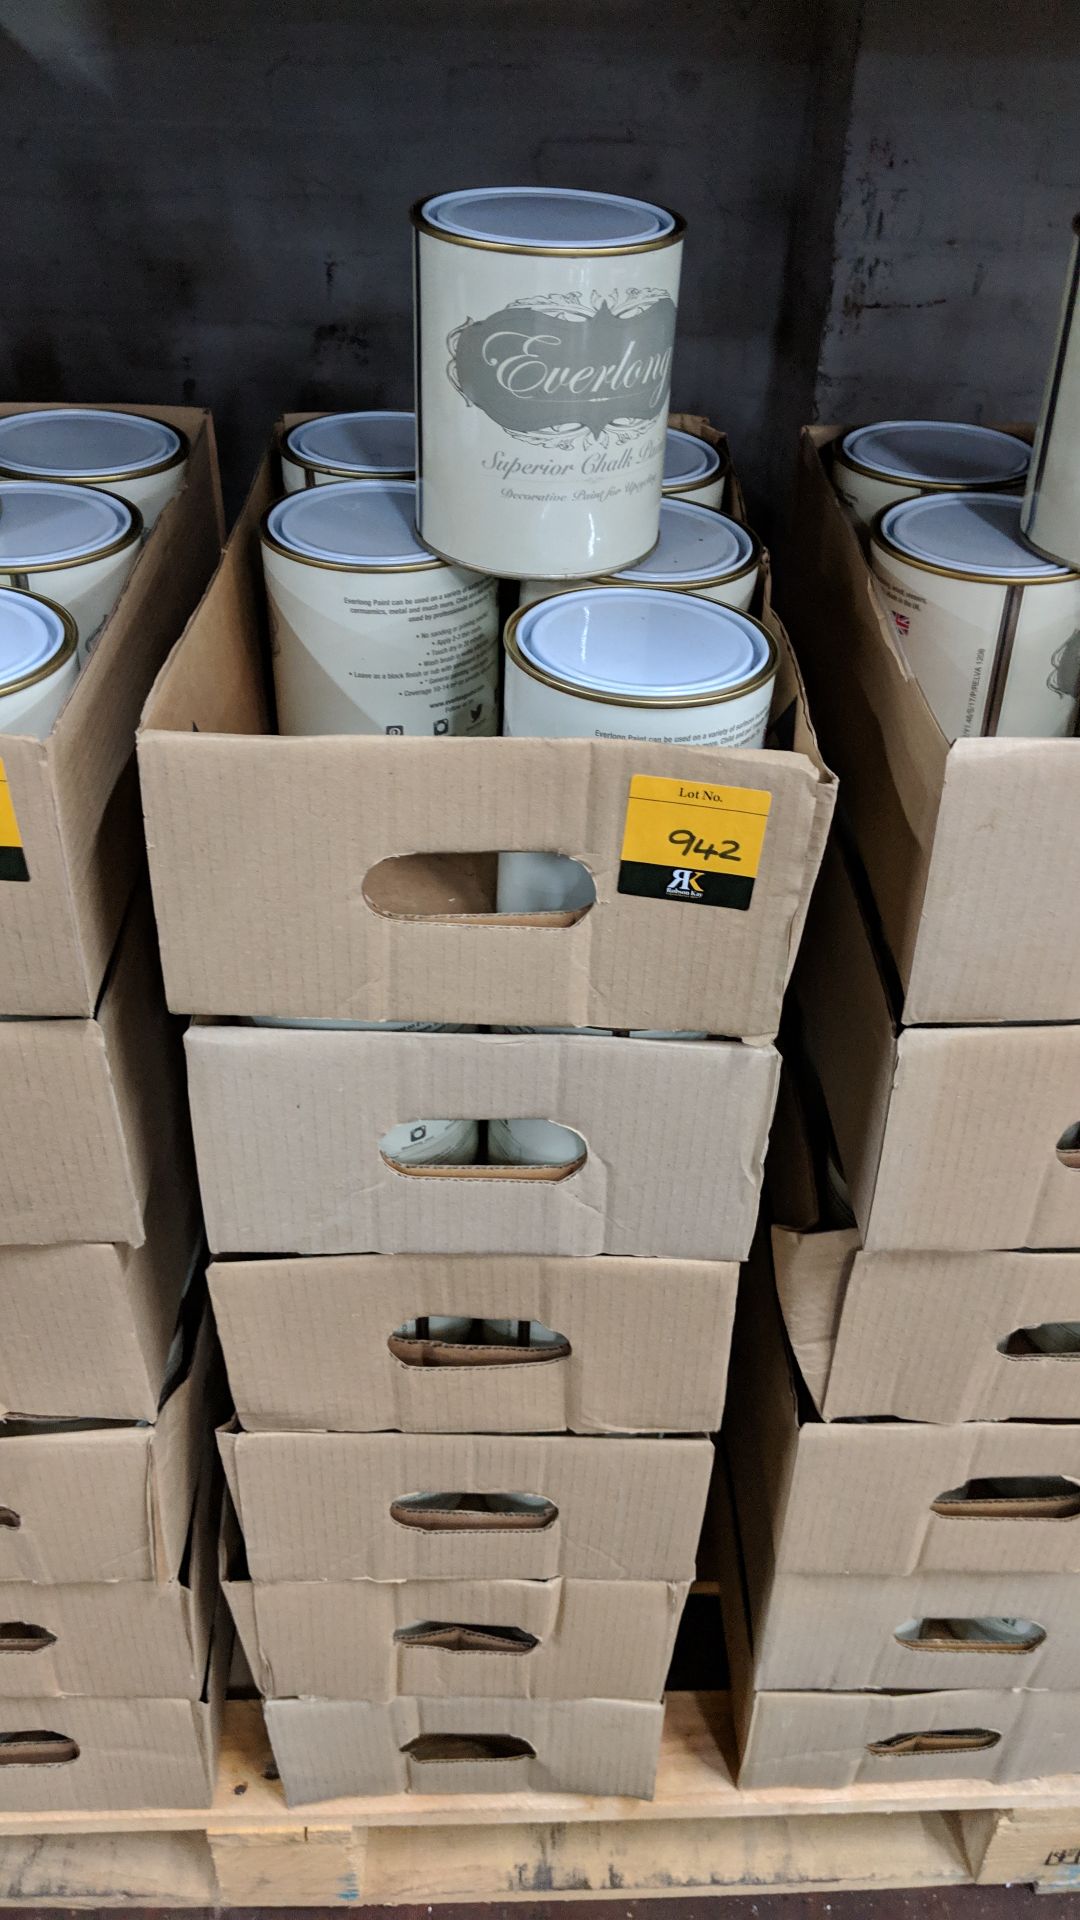 36 off 1 litre tins of Everlong branded superior chalk paint - colour Mandarin. NB the tins in